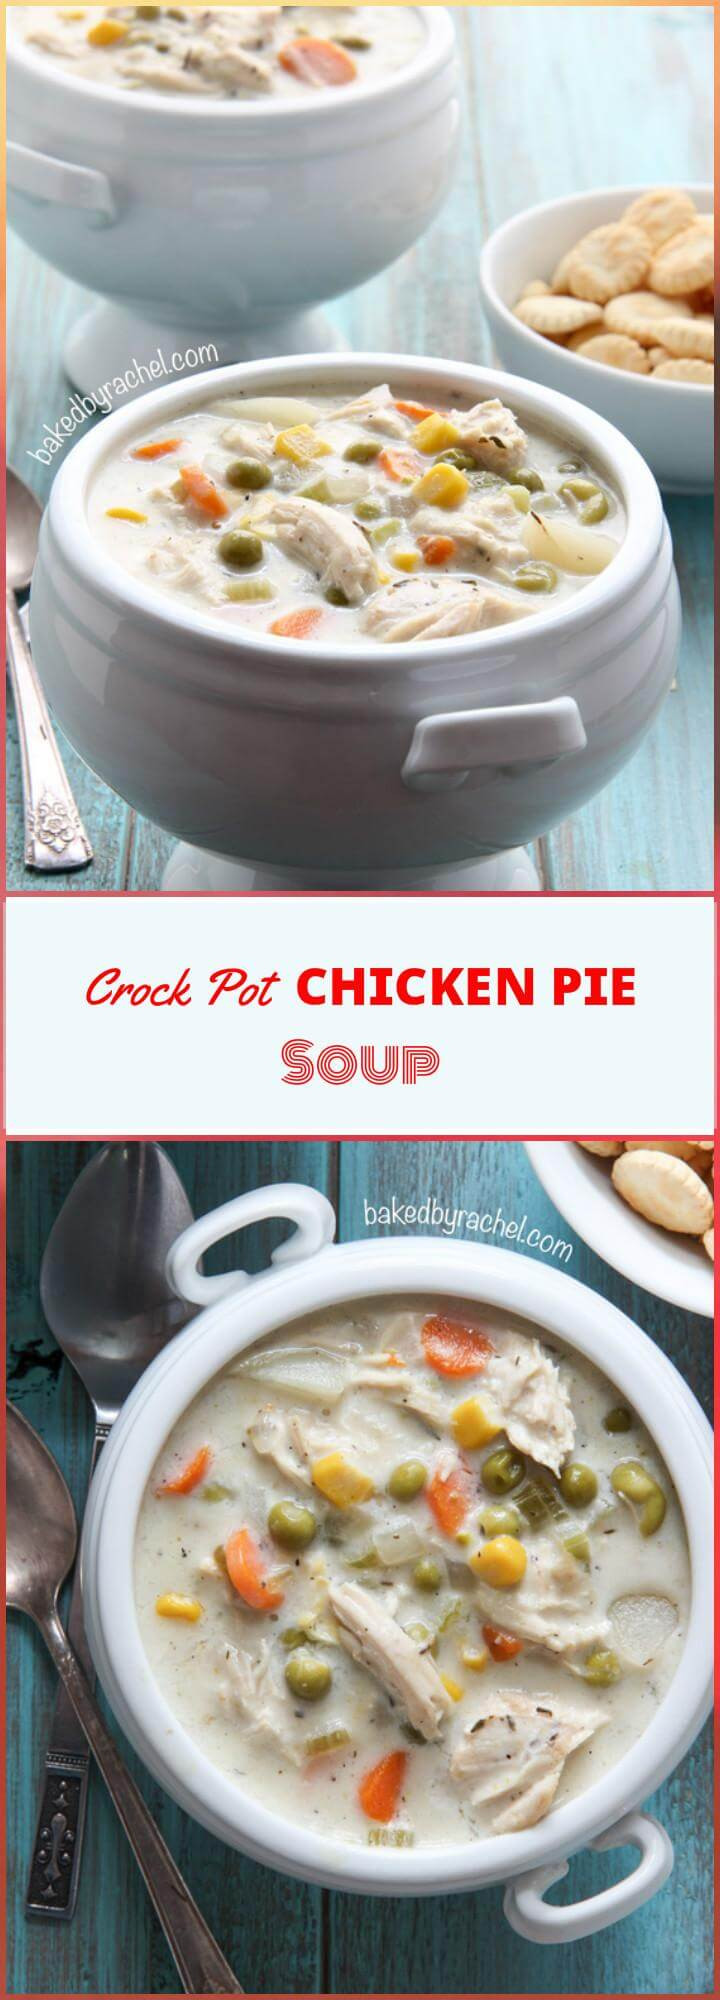 Crock Pot Chicken Pot Pie Healthy
 100 Easy Slow Cooker Recipes Crock Pot Recipes for Busy